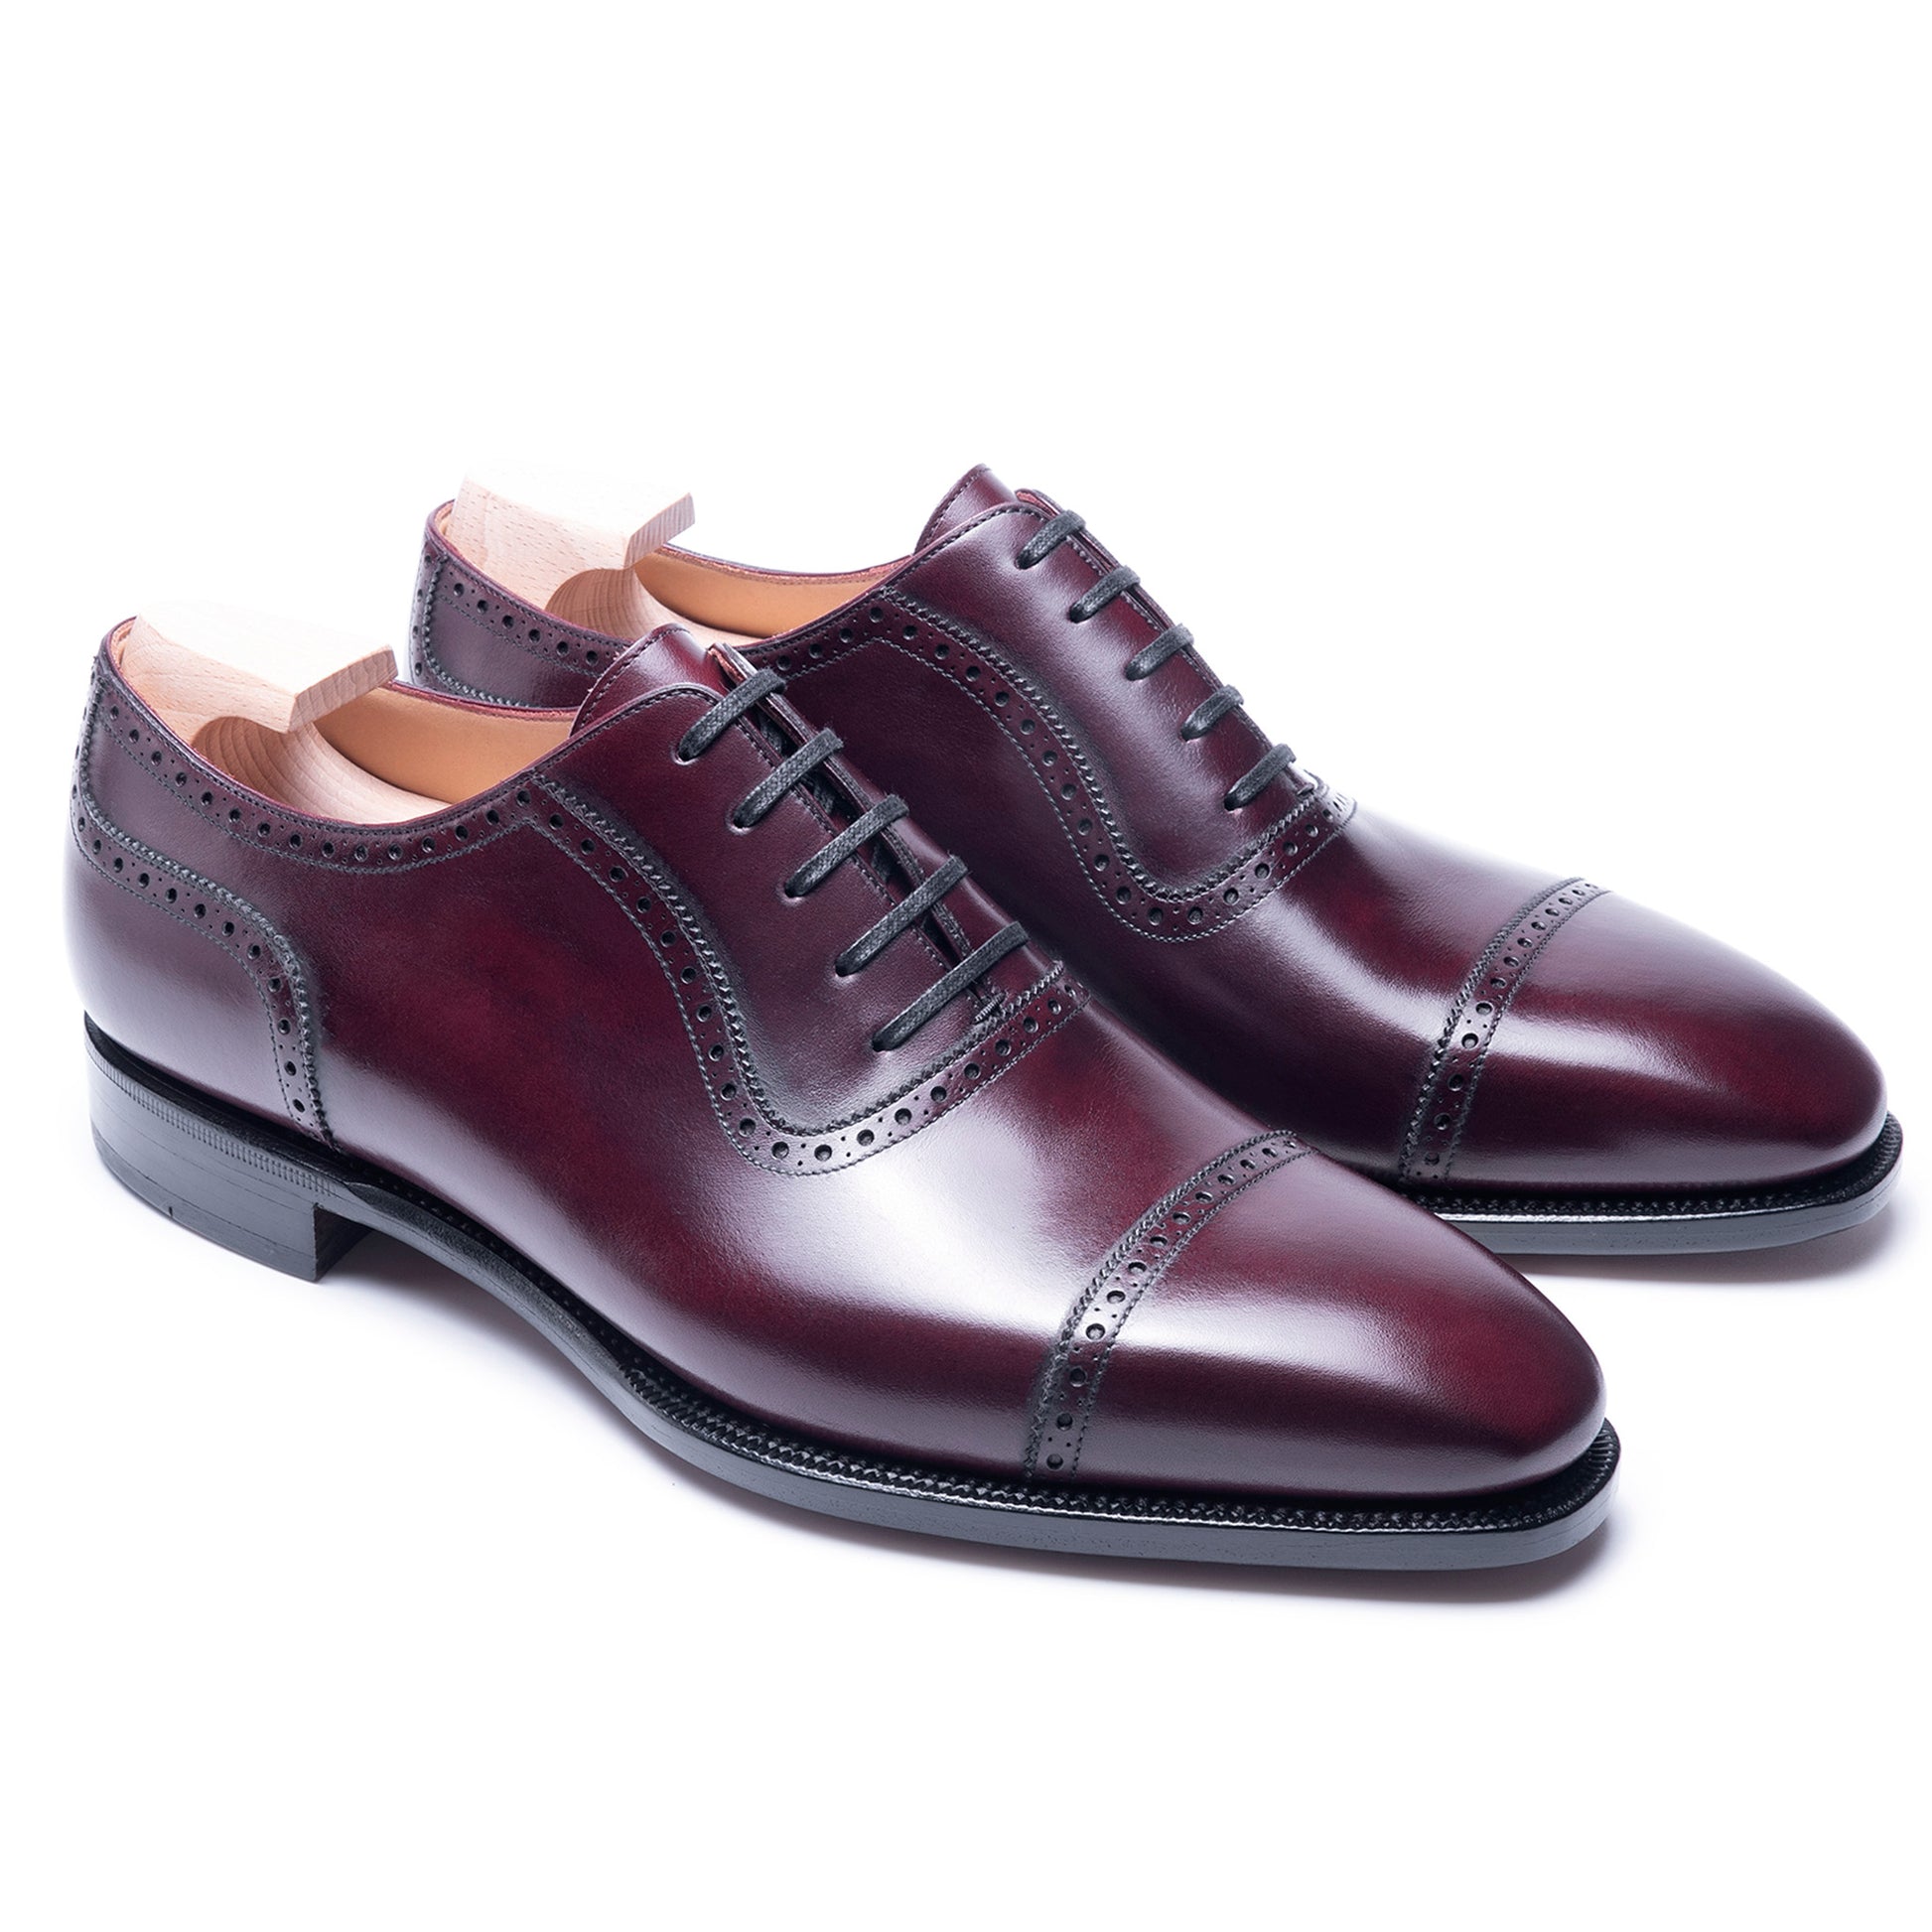 TLB Mallorca leather shoes 121 / PICASSO / VEGANO BURGUNDY